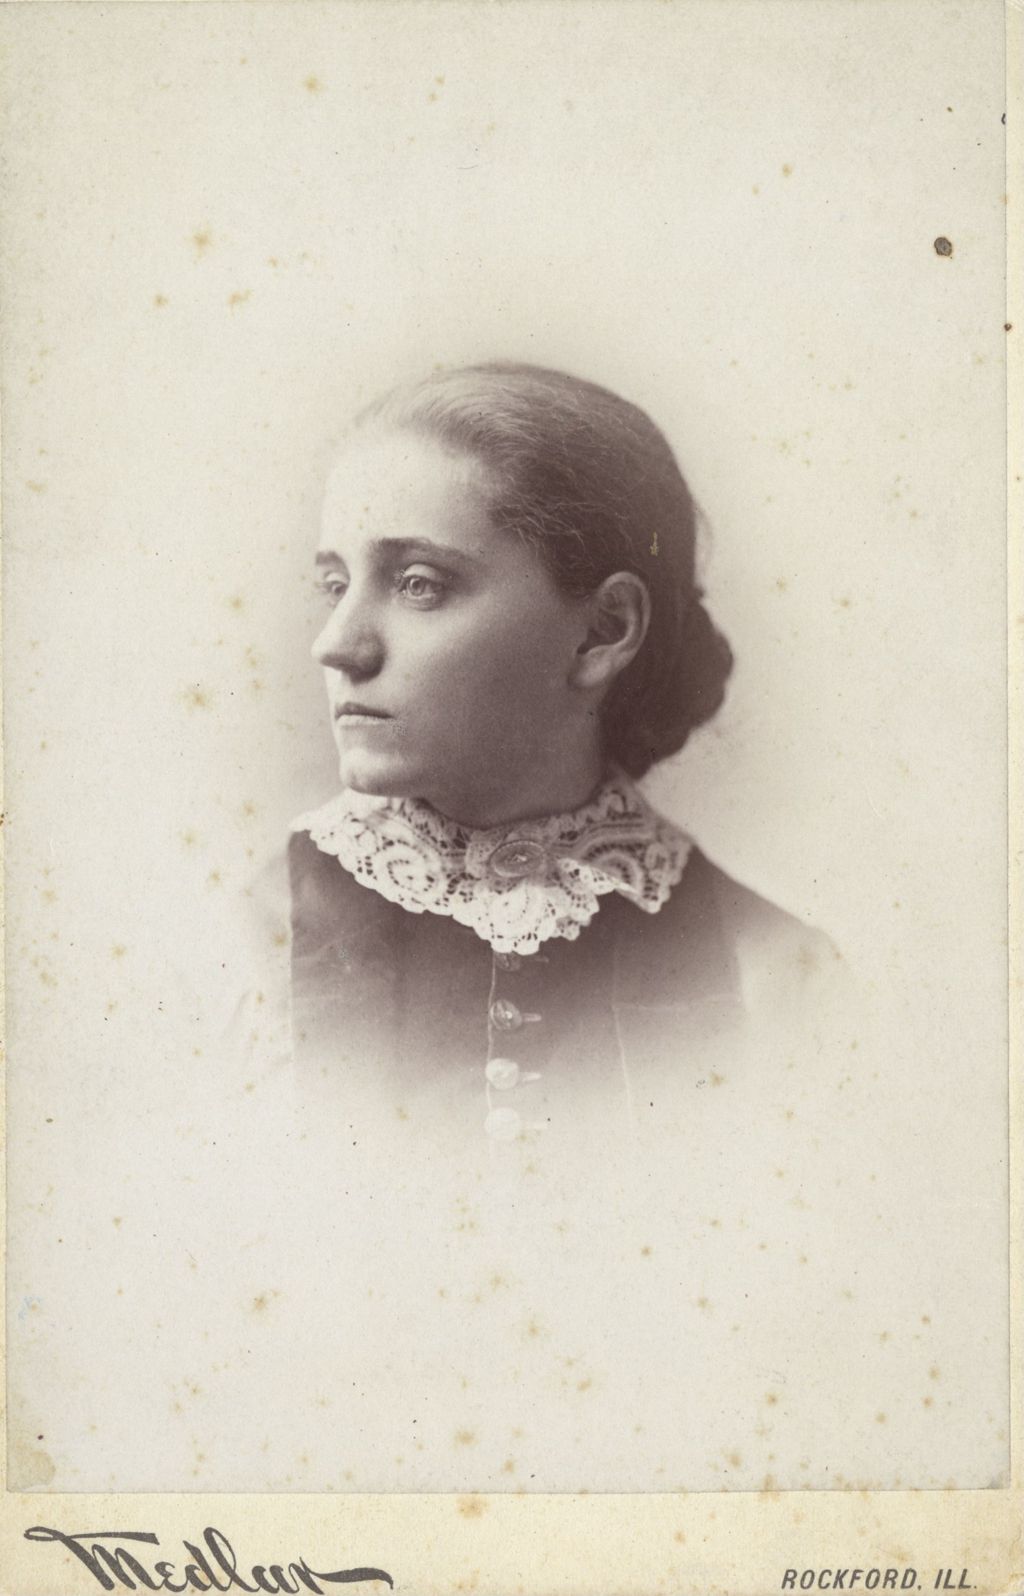 Portrait of Jane Addams, at age 18, while an undergraduate at Rockford Female Seminary